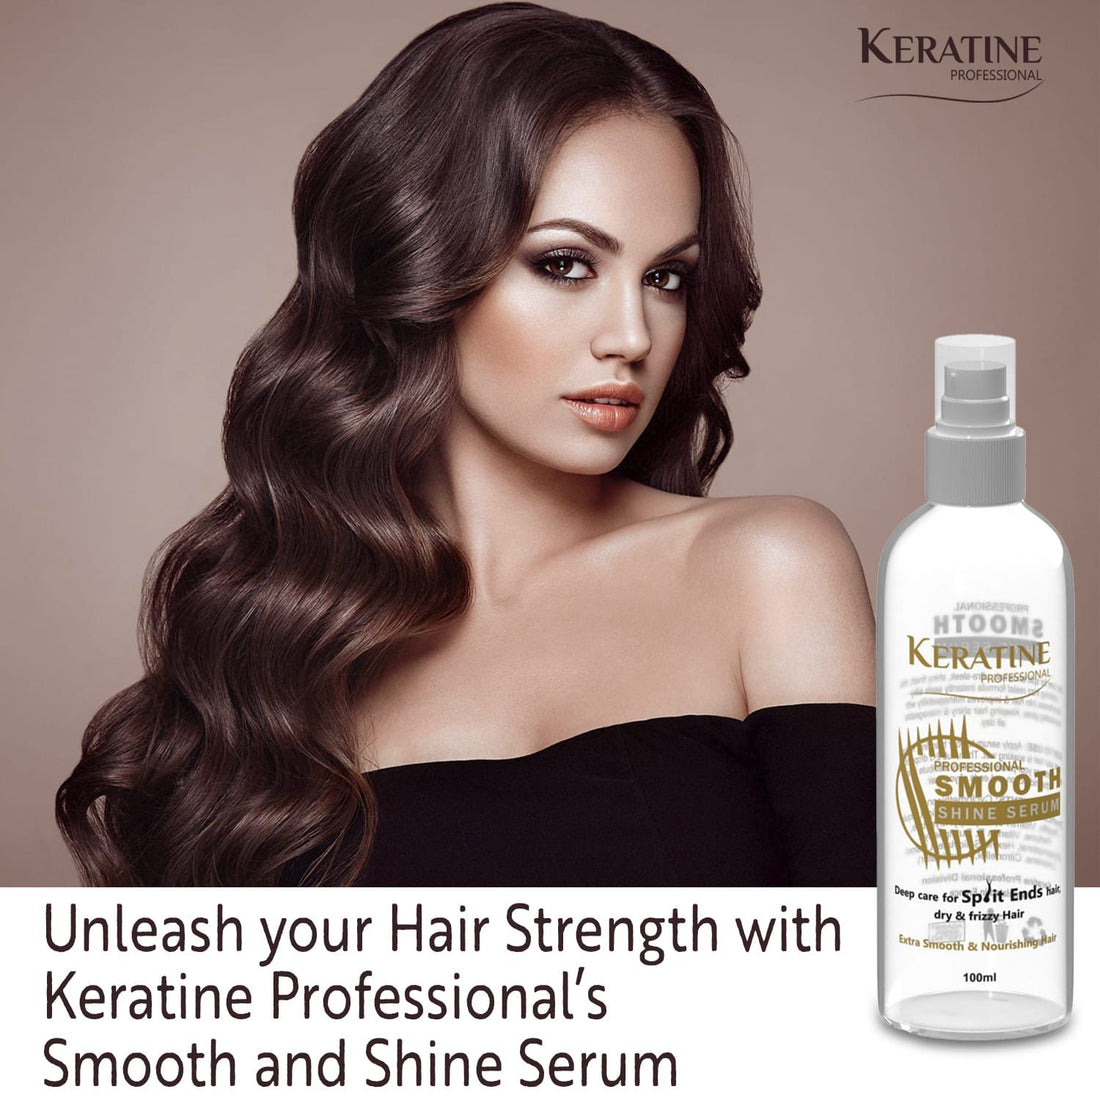 KERATINE PROFESSSIONAL SMOOTHING SHINE SERUM DEEP CARE FOR SPRIT IT END HAIR DRY & FRIZZY HAIR  100ml